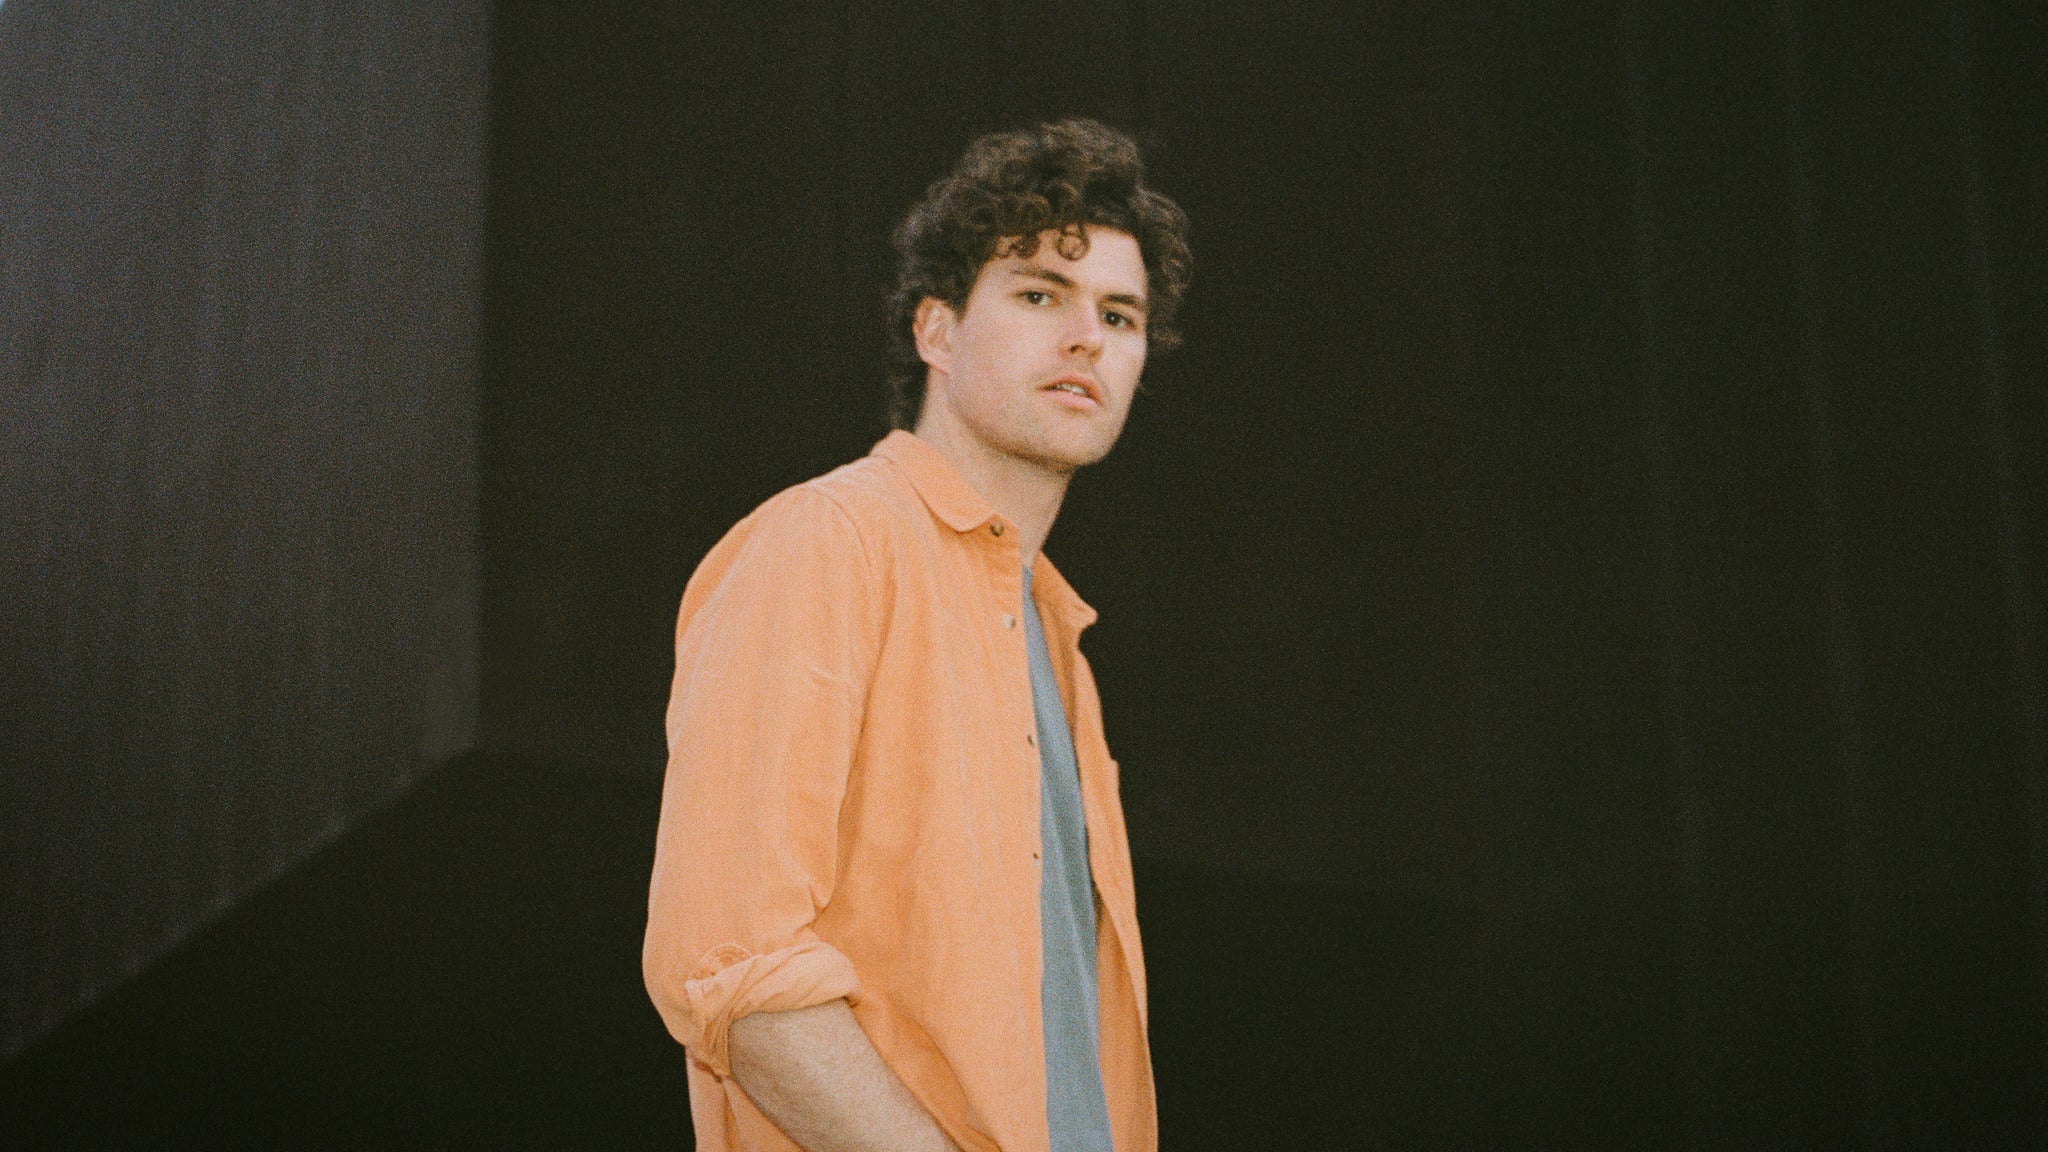 Image used with permission from Ticketmaster | Vance Joy - The Long Way Home Tour tickets